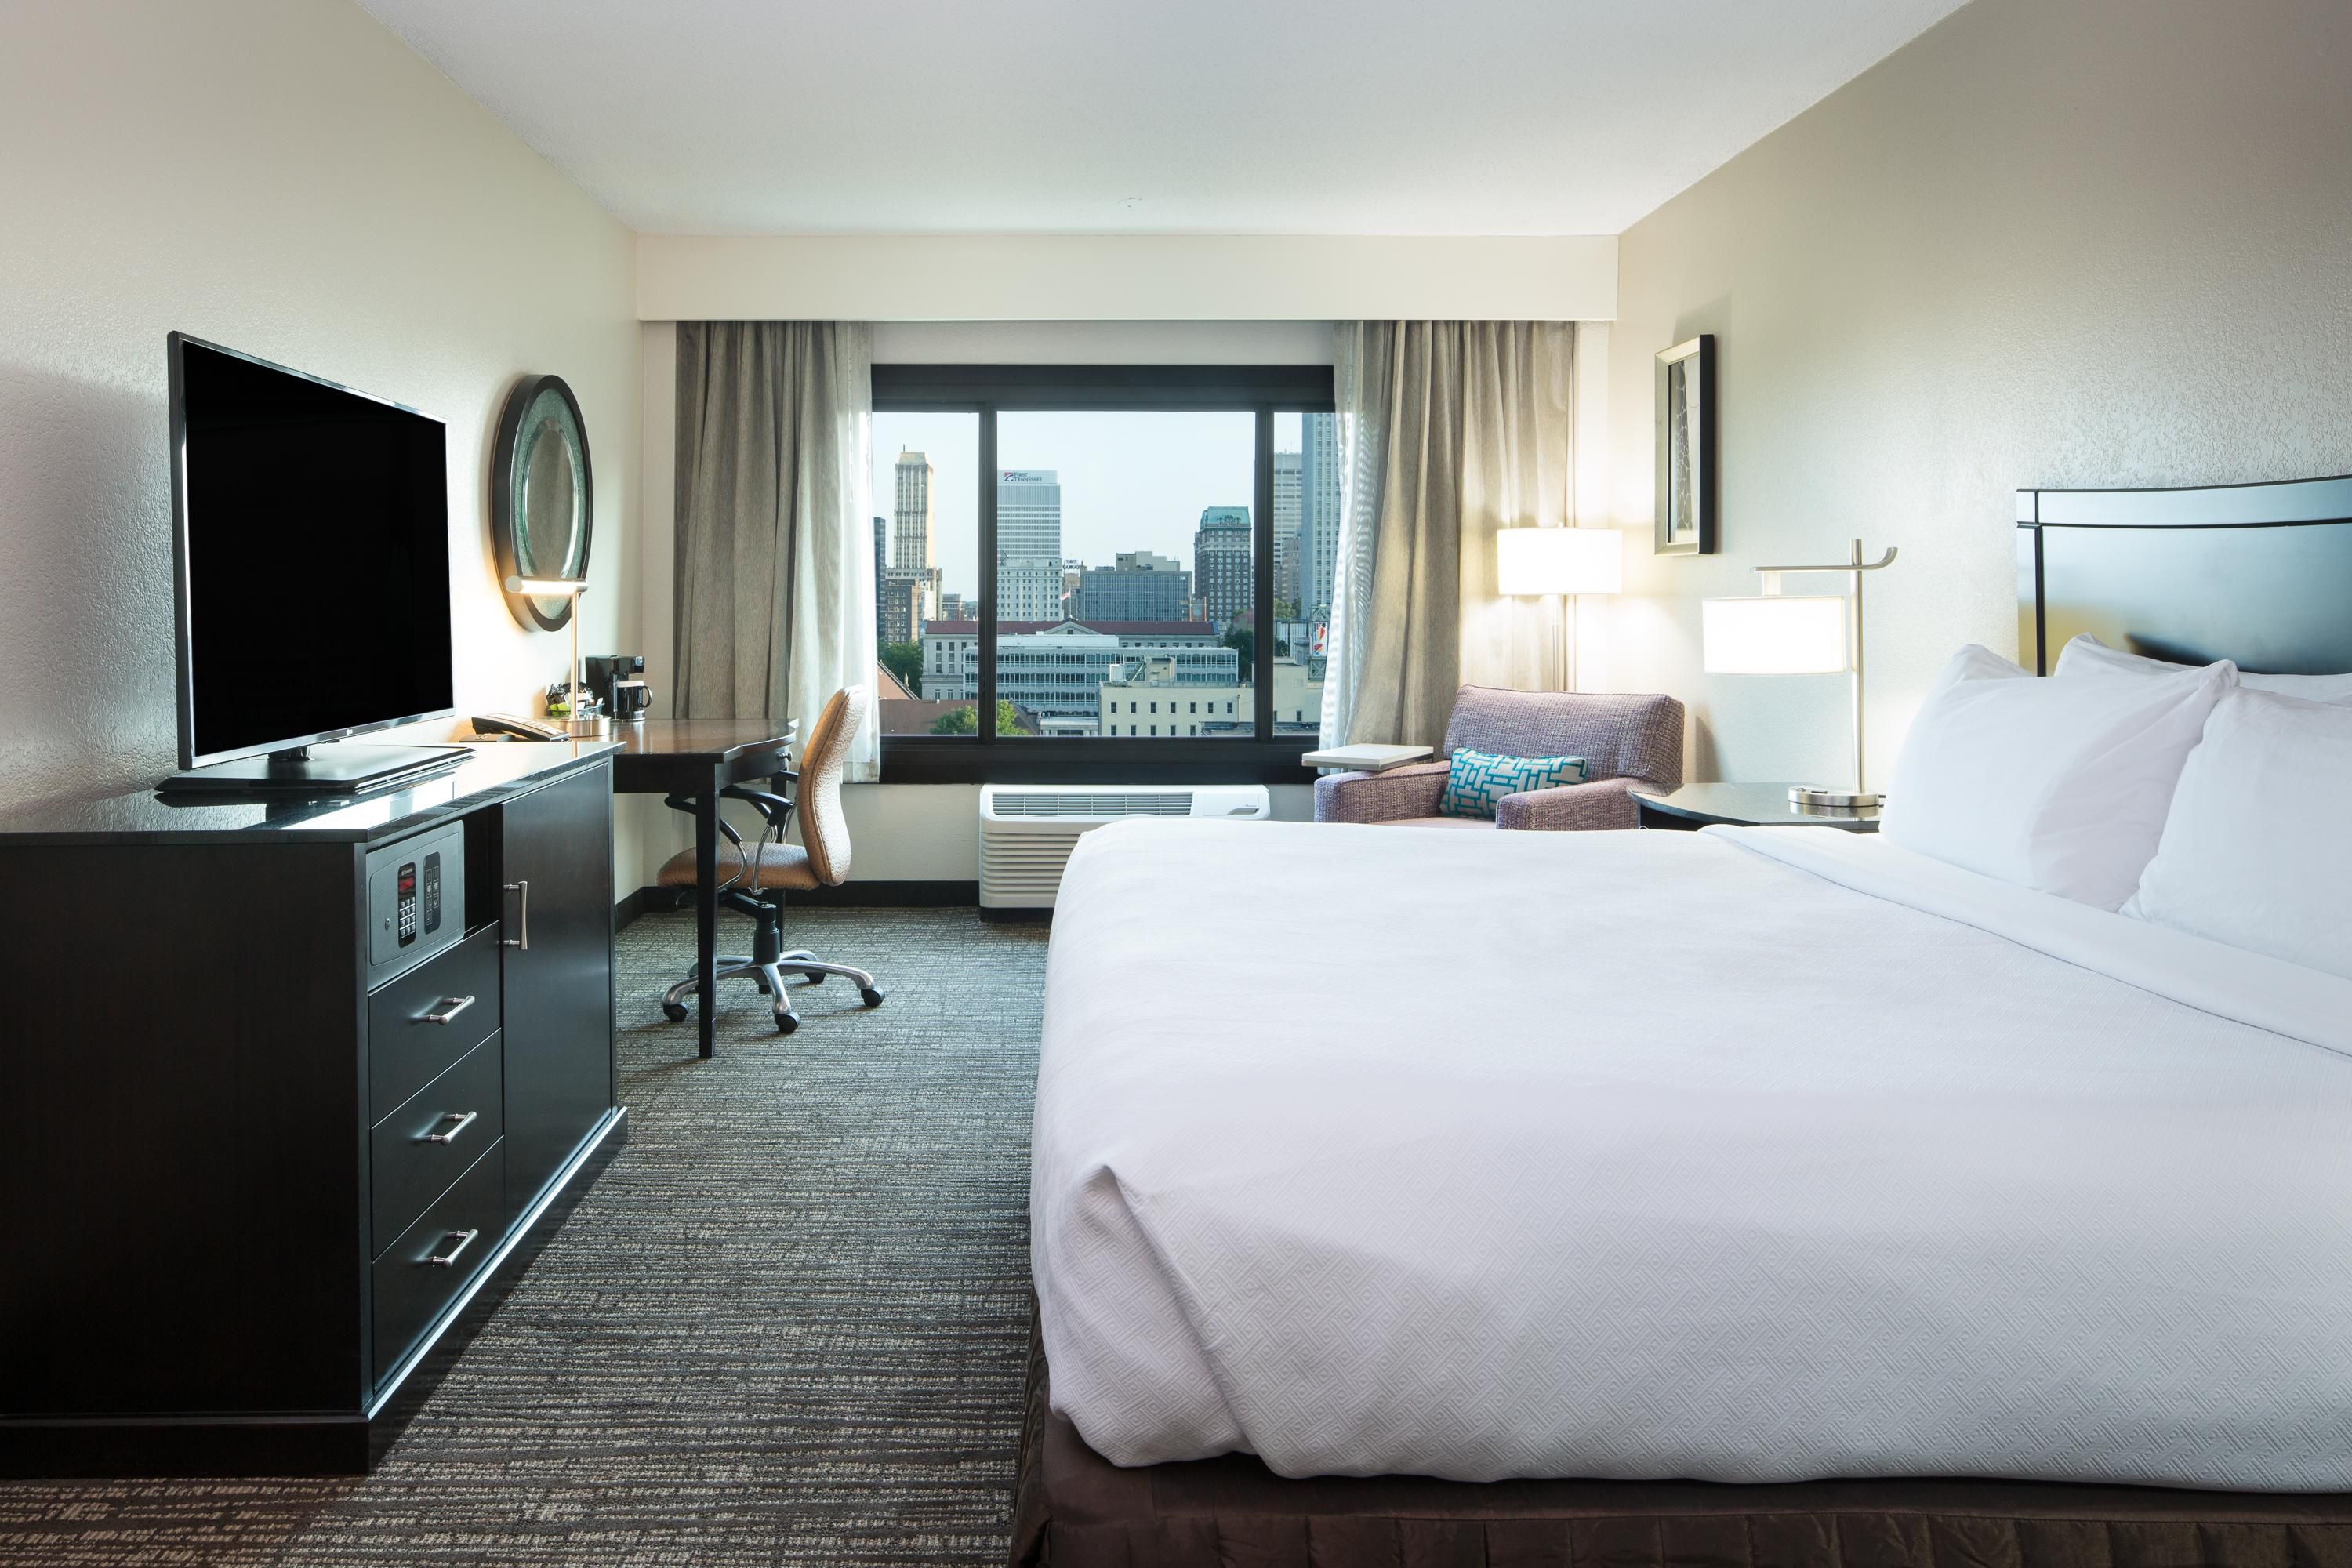 Our spacious king room gives you a top of the world scenic view